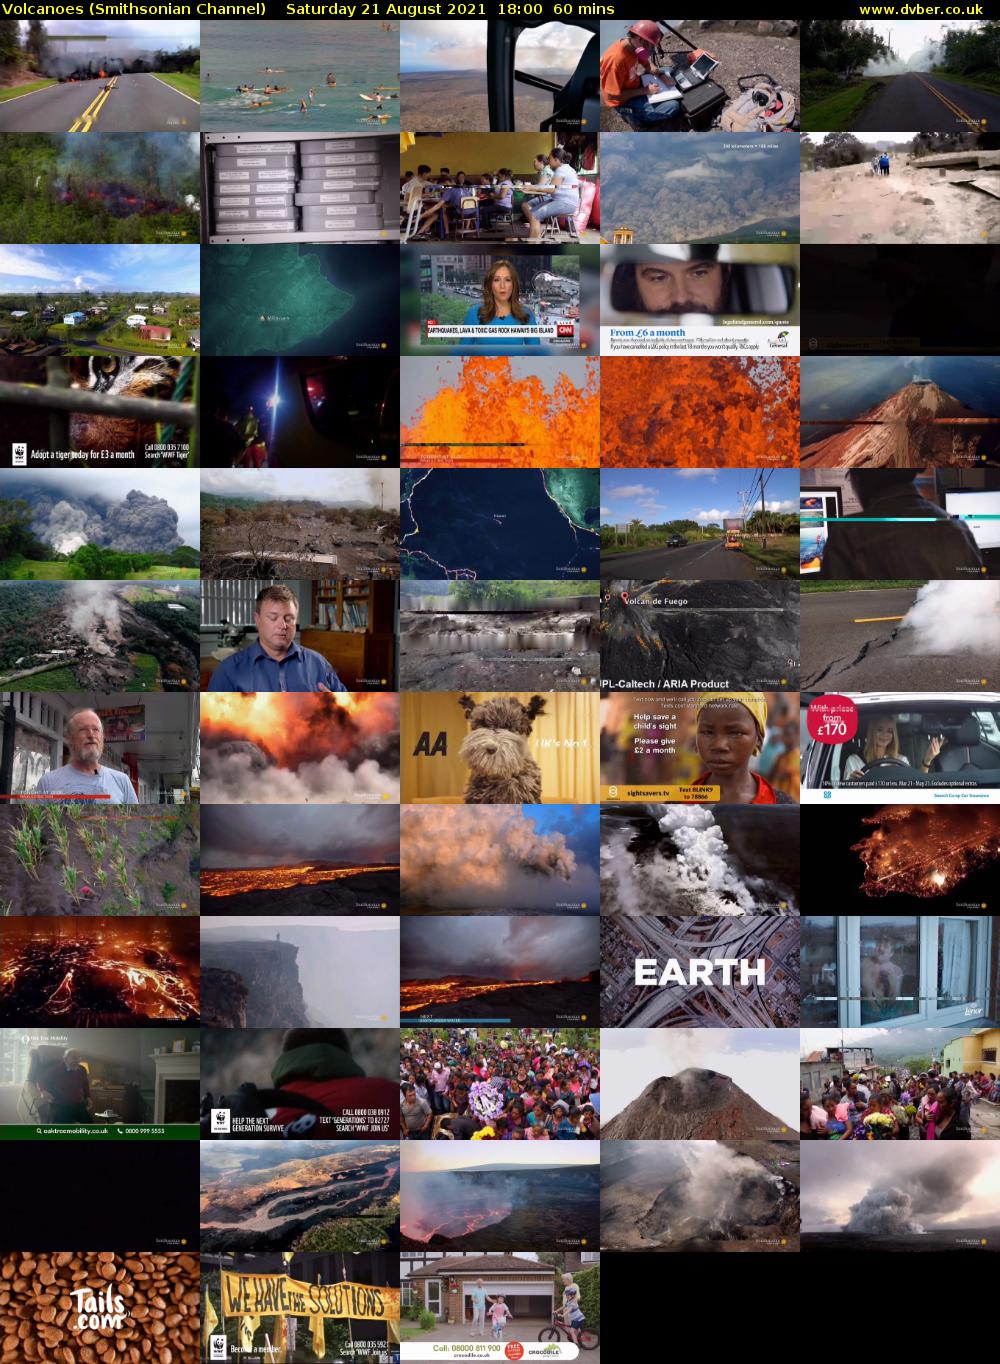 Volcanoes (Smithsonian Channel) Saturday 21 August 2021 19:00 - 20:00